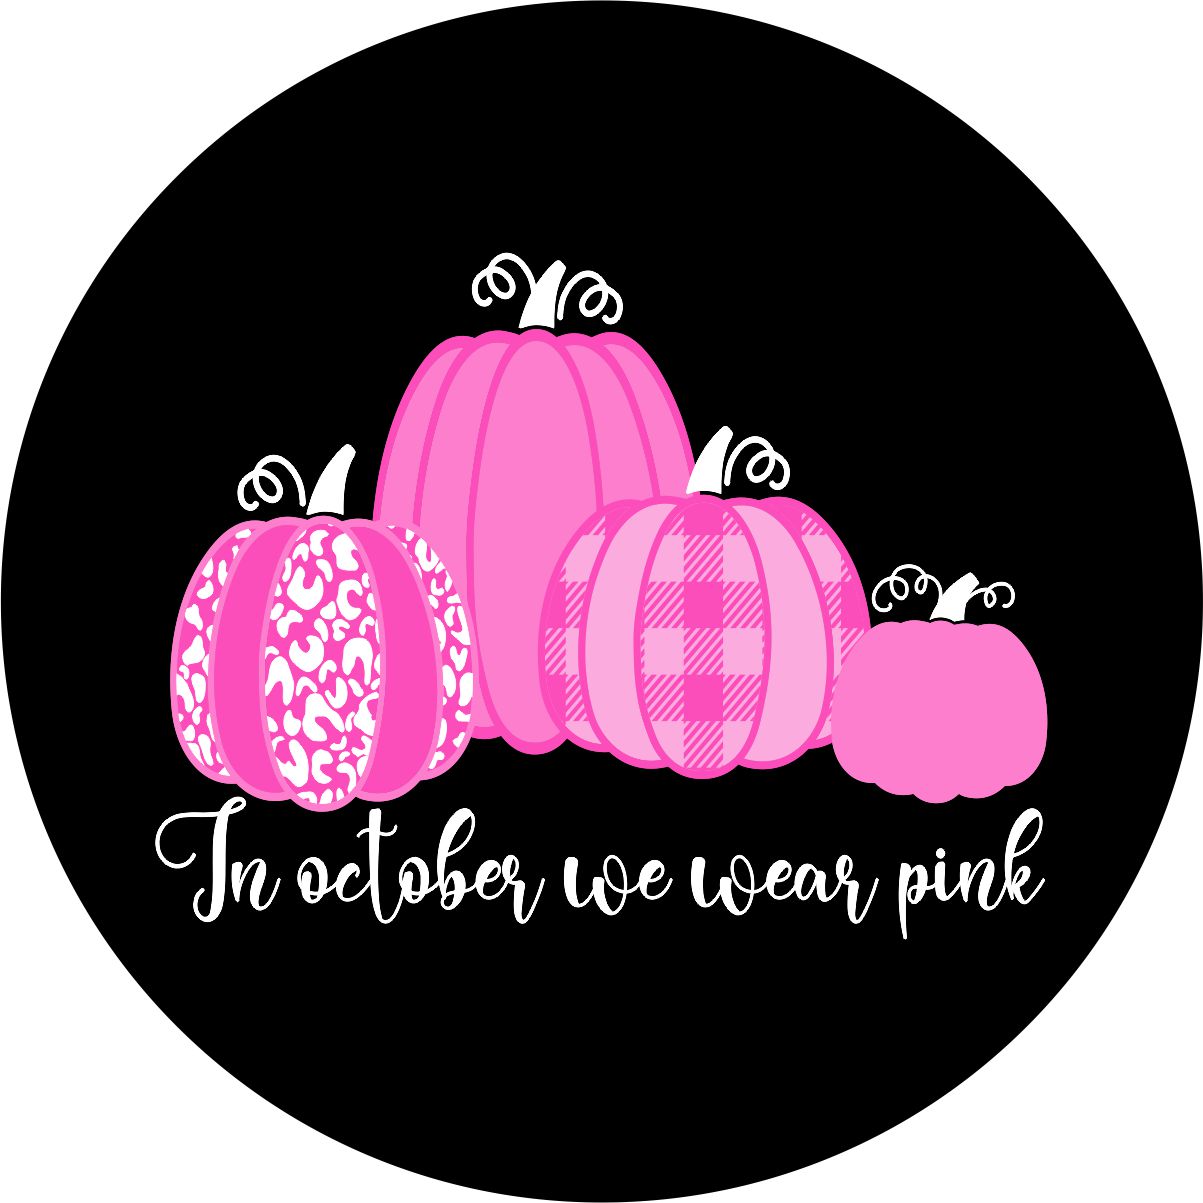 Four pink pumpkins designed with the saying in October we wear pink spare tire cover on black vinyl for Jeep, RV, Camper, Bronco and more